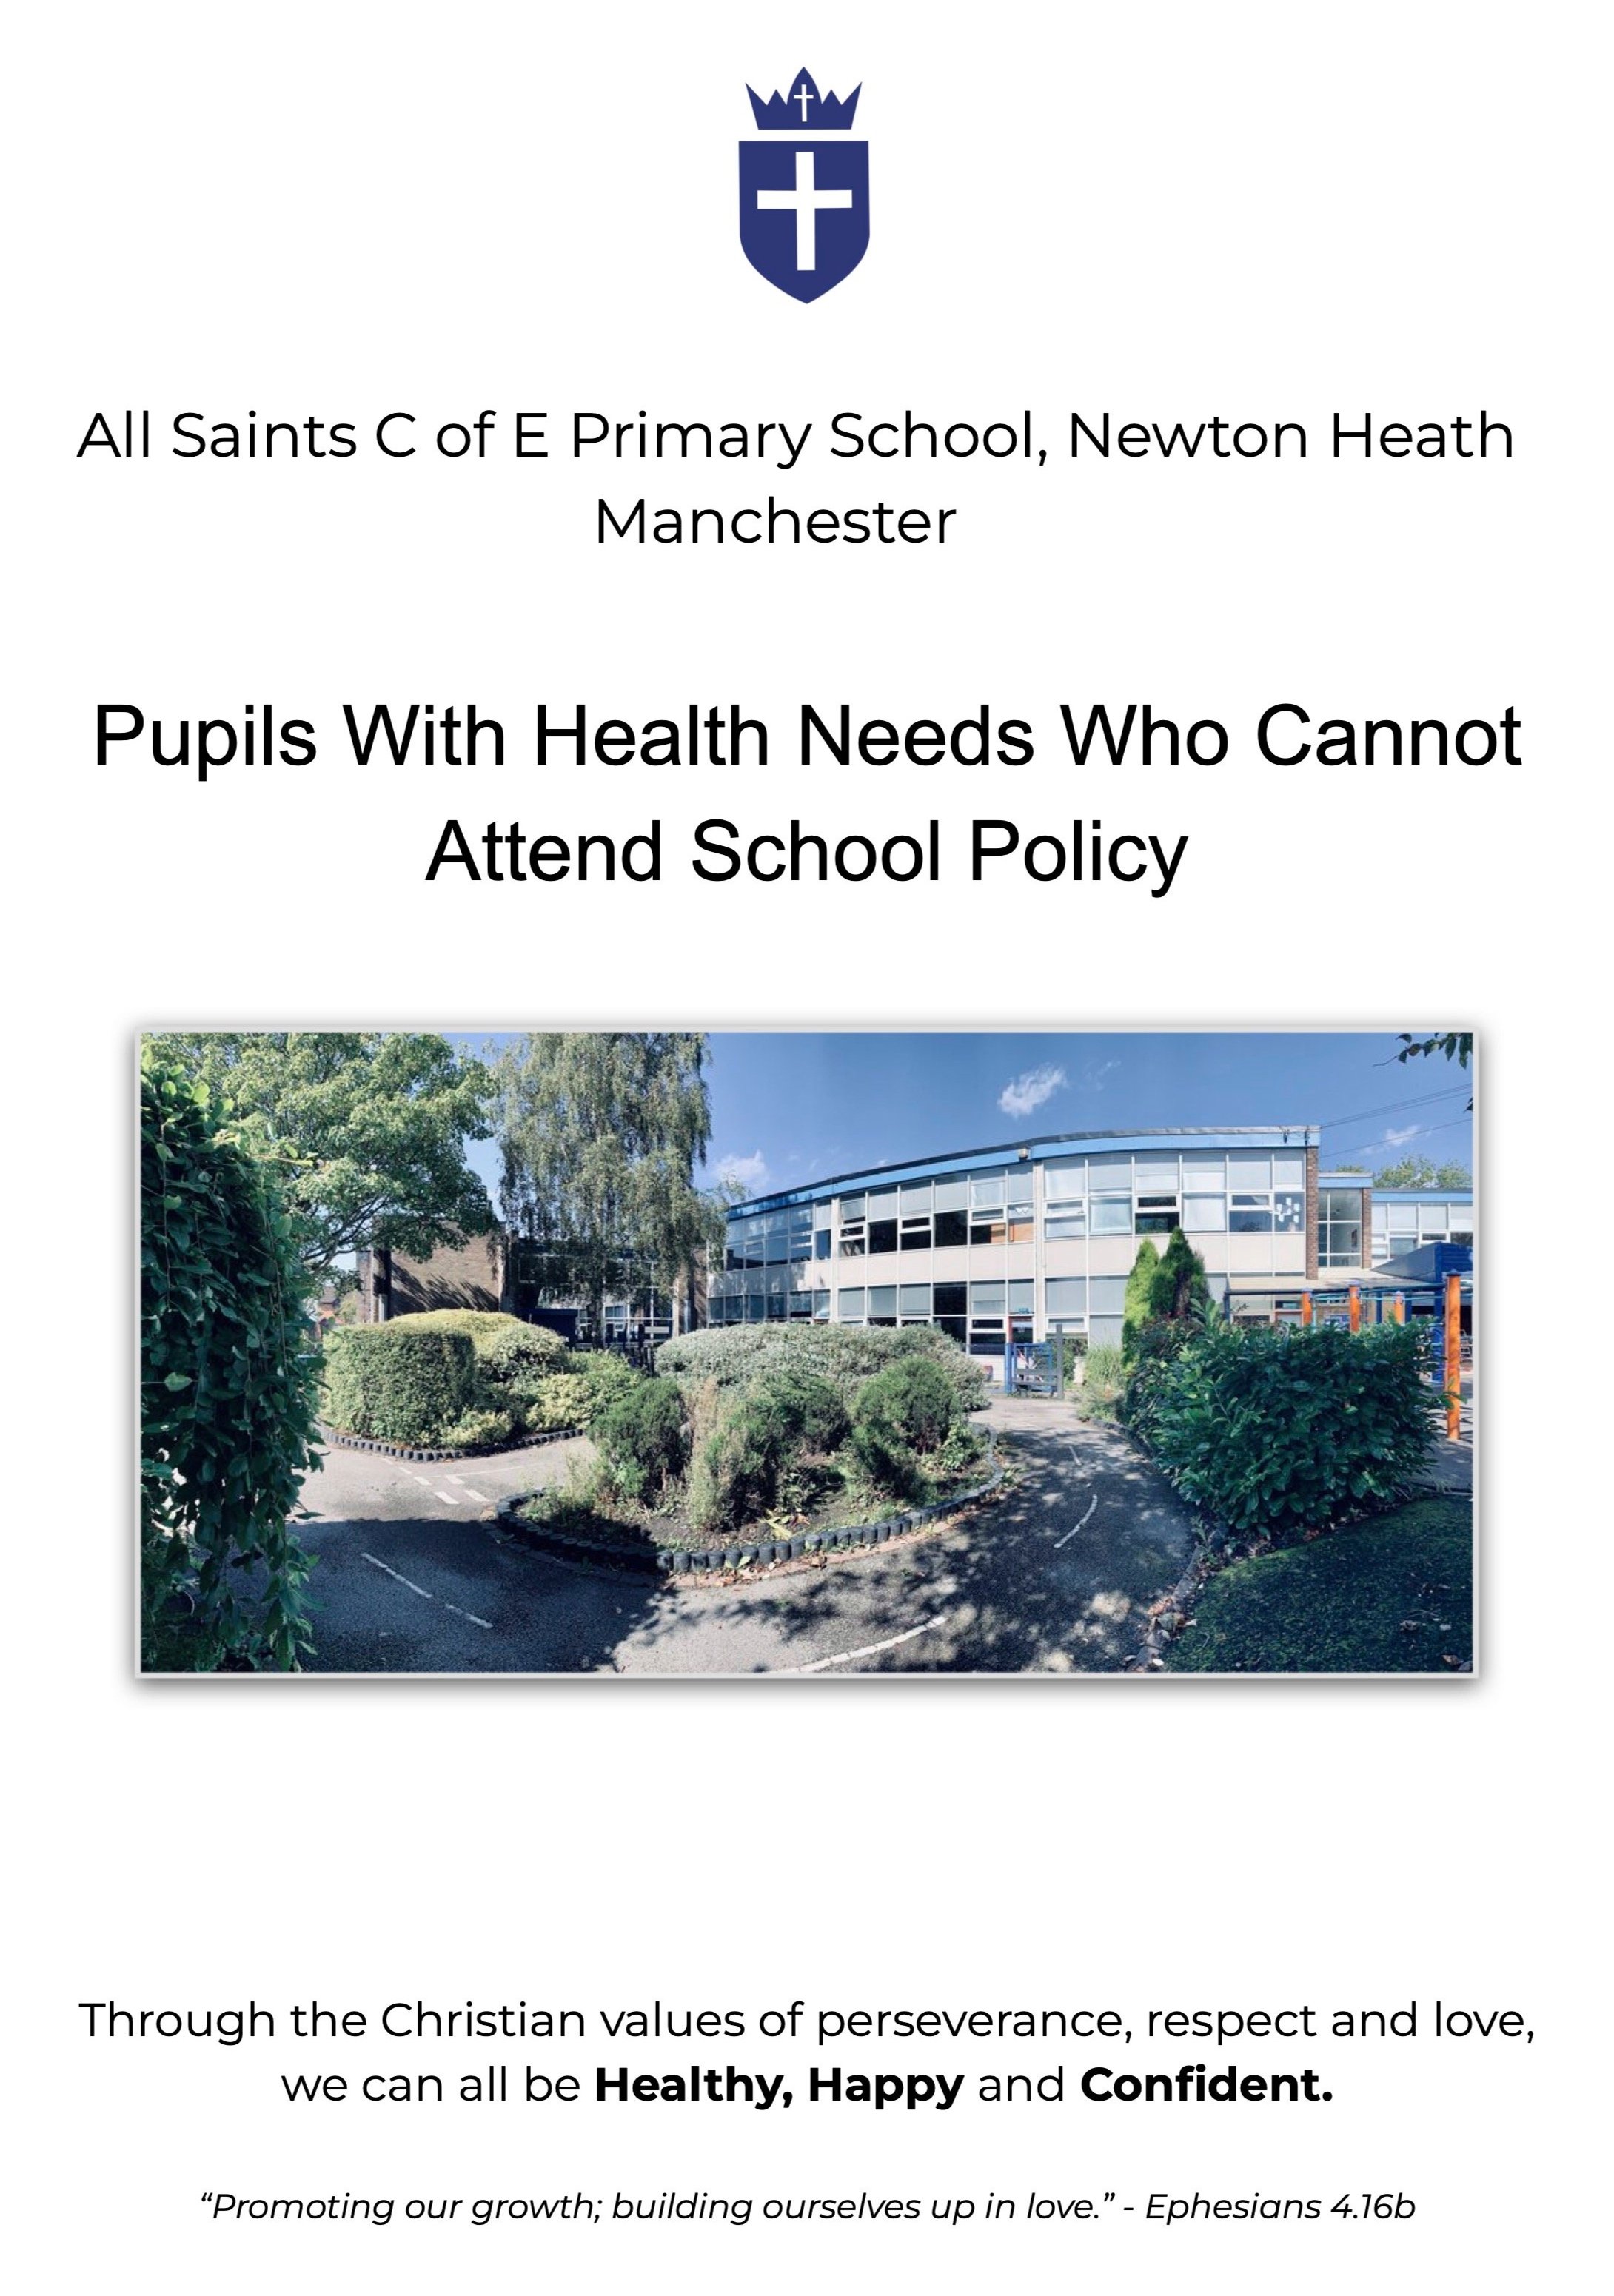 Pupils+With+Health+Needs+Who+Cannot+Attend+School+Policy-2.jpg